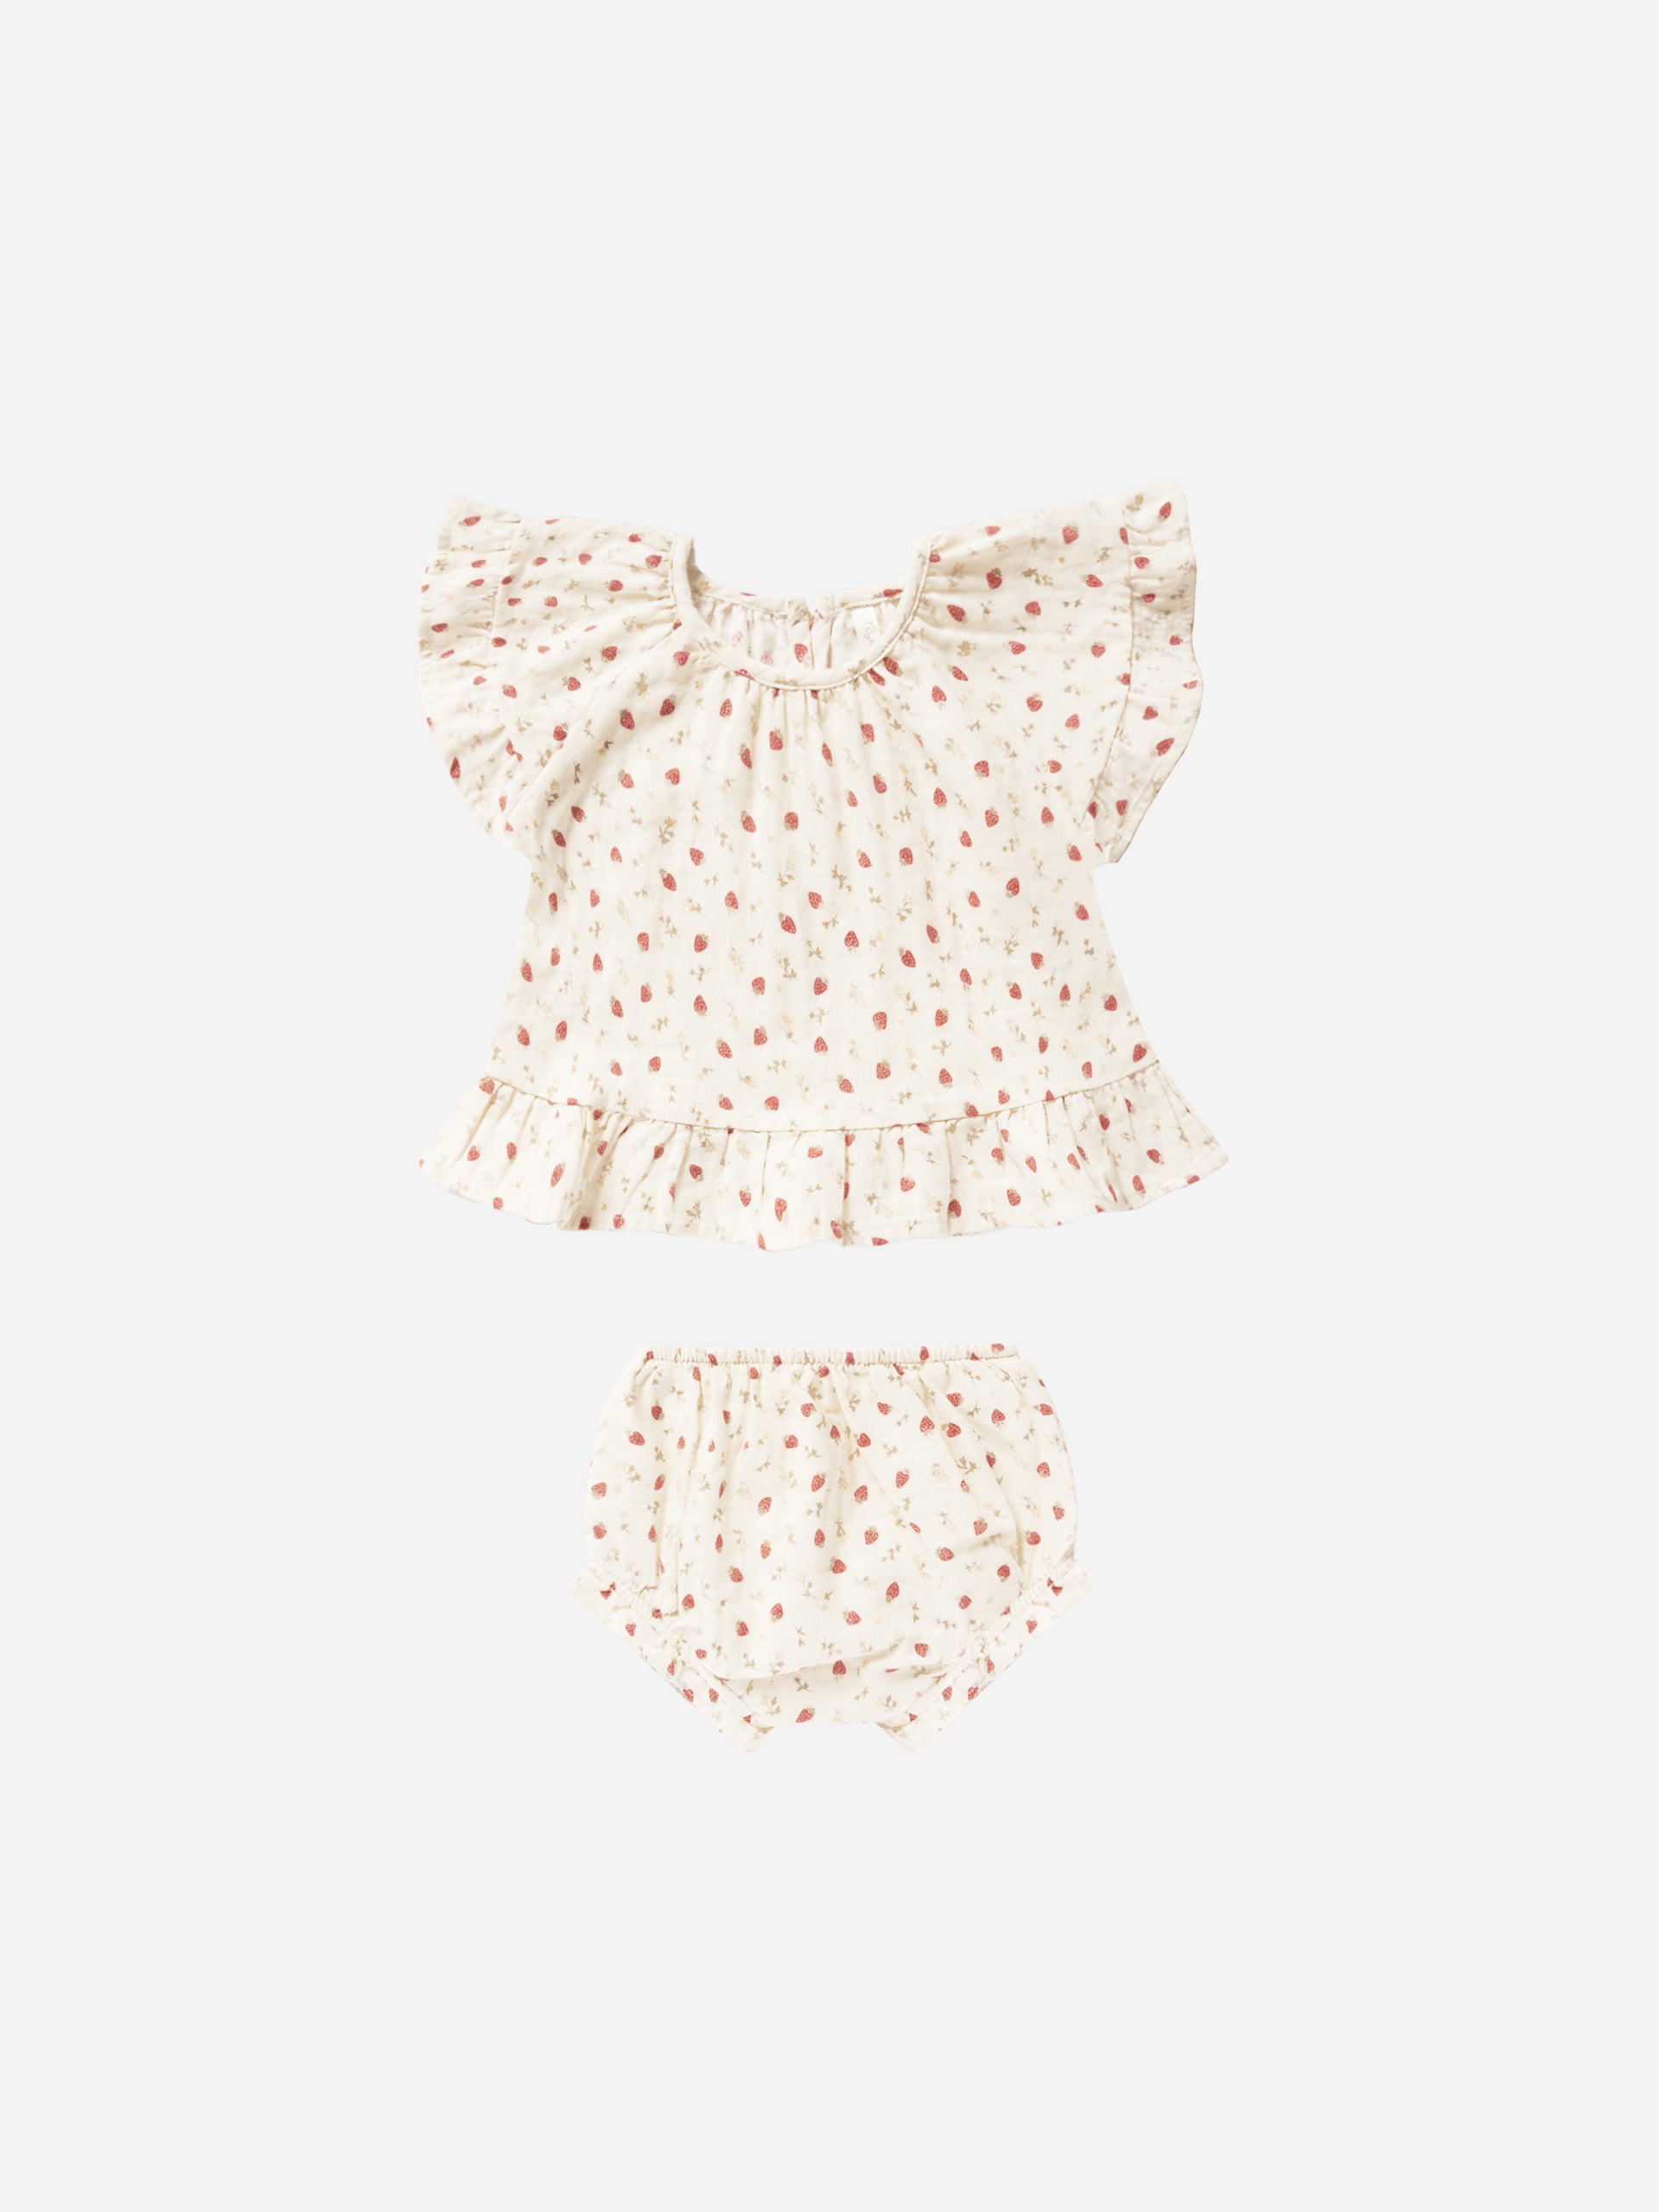 Butterfly Top + Bloomer Set || Strawberry Fields - Rylee + Cru | Kids Clothes | Trendy Baby Clothes | Modern Infant Outfits |